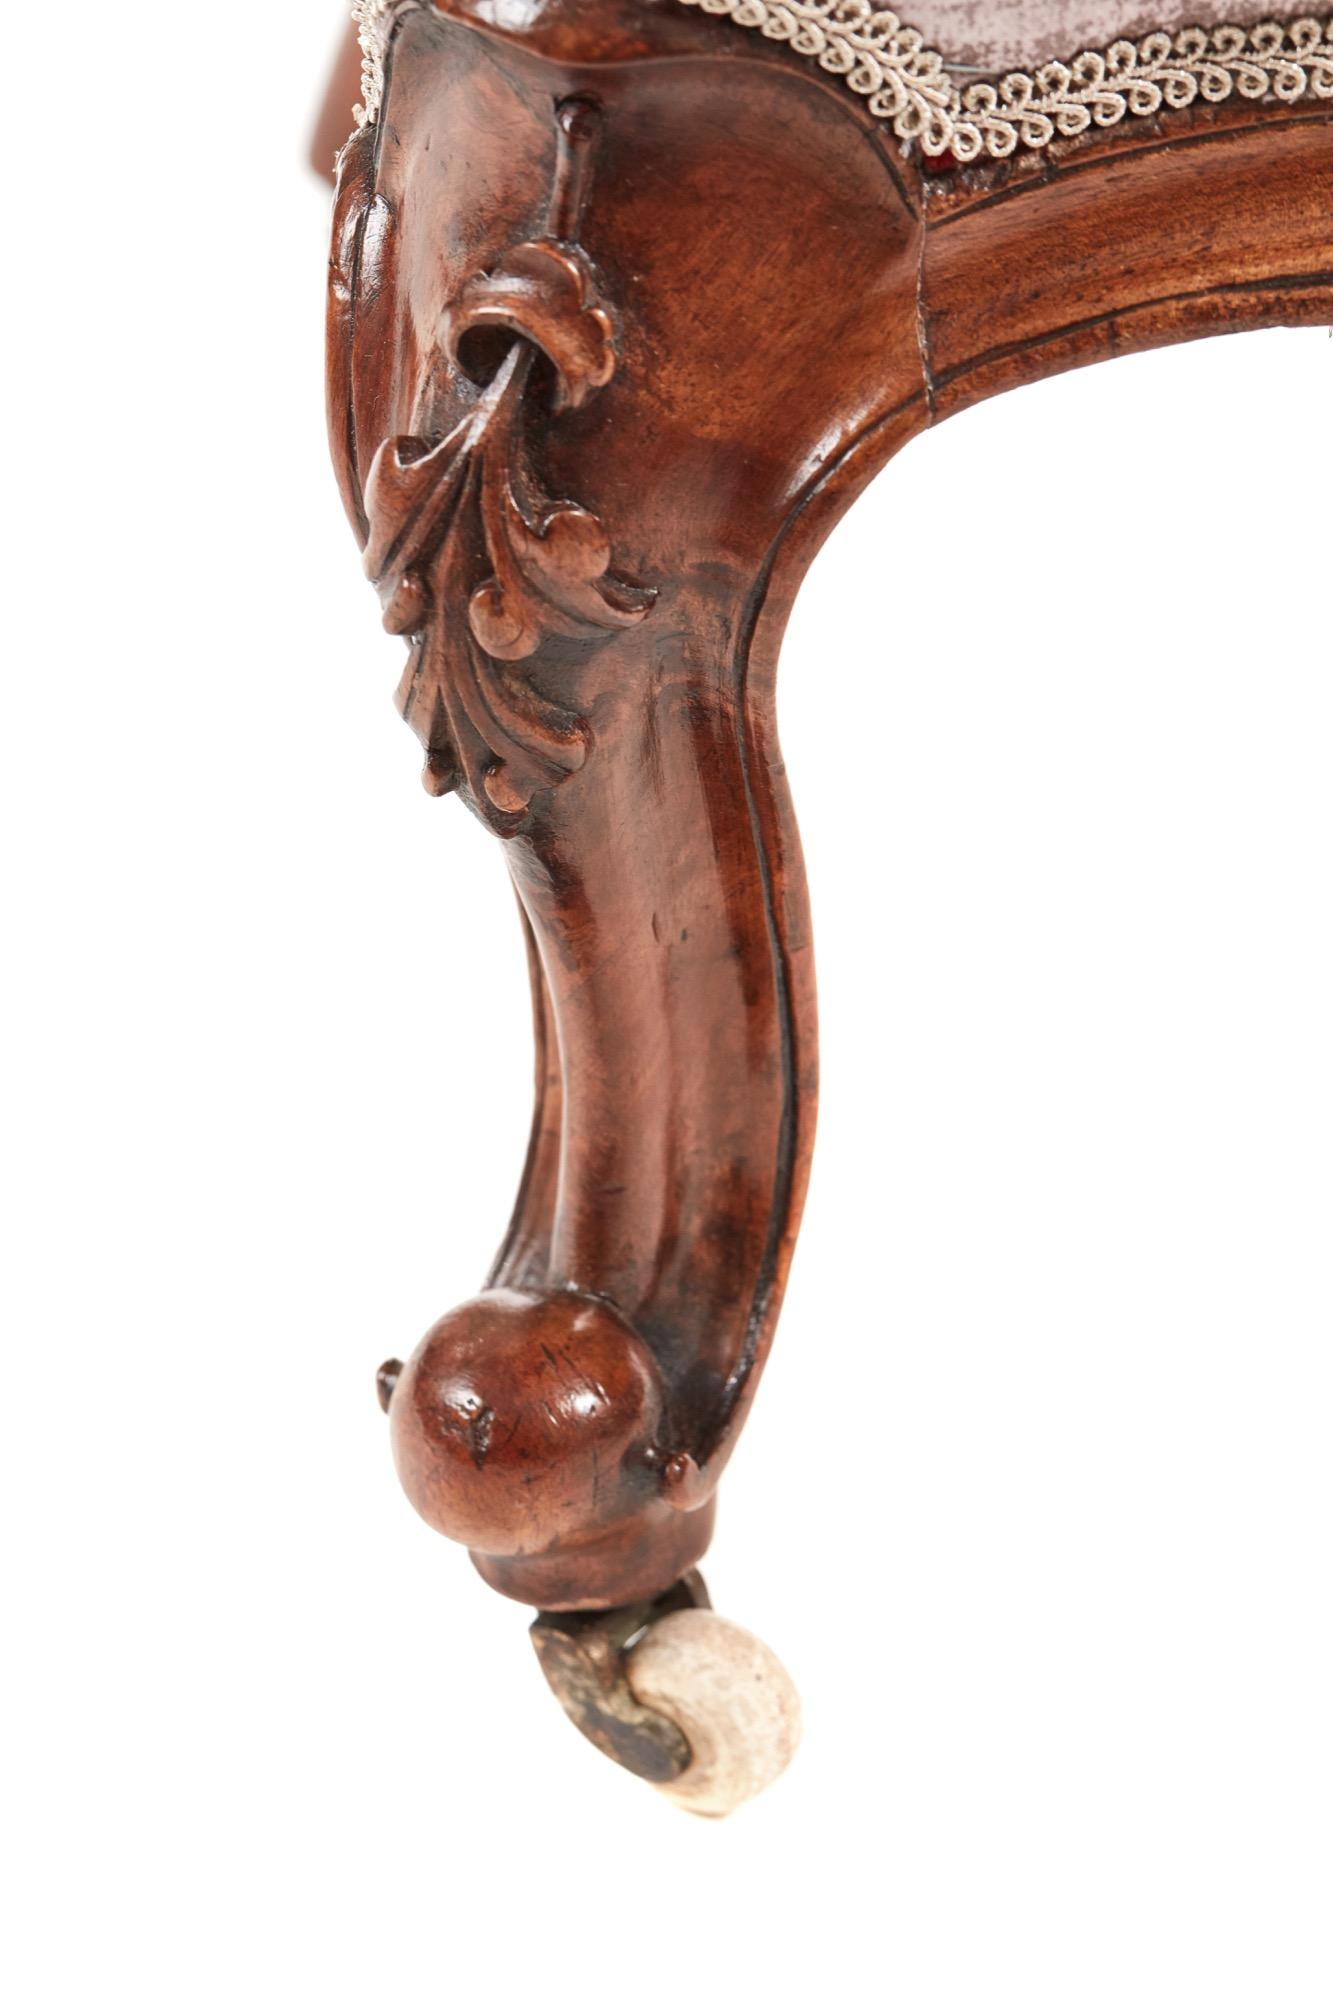 This is a fine Victorian antique carved walnut ladies chair with lovely carved detail to the top. It has a shaped back and serpentine carved front rail. It stands on lovely carved cabriole legs with out swept back legs. 

All in solid walnut